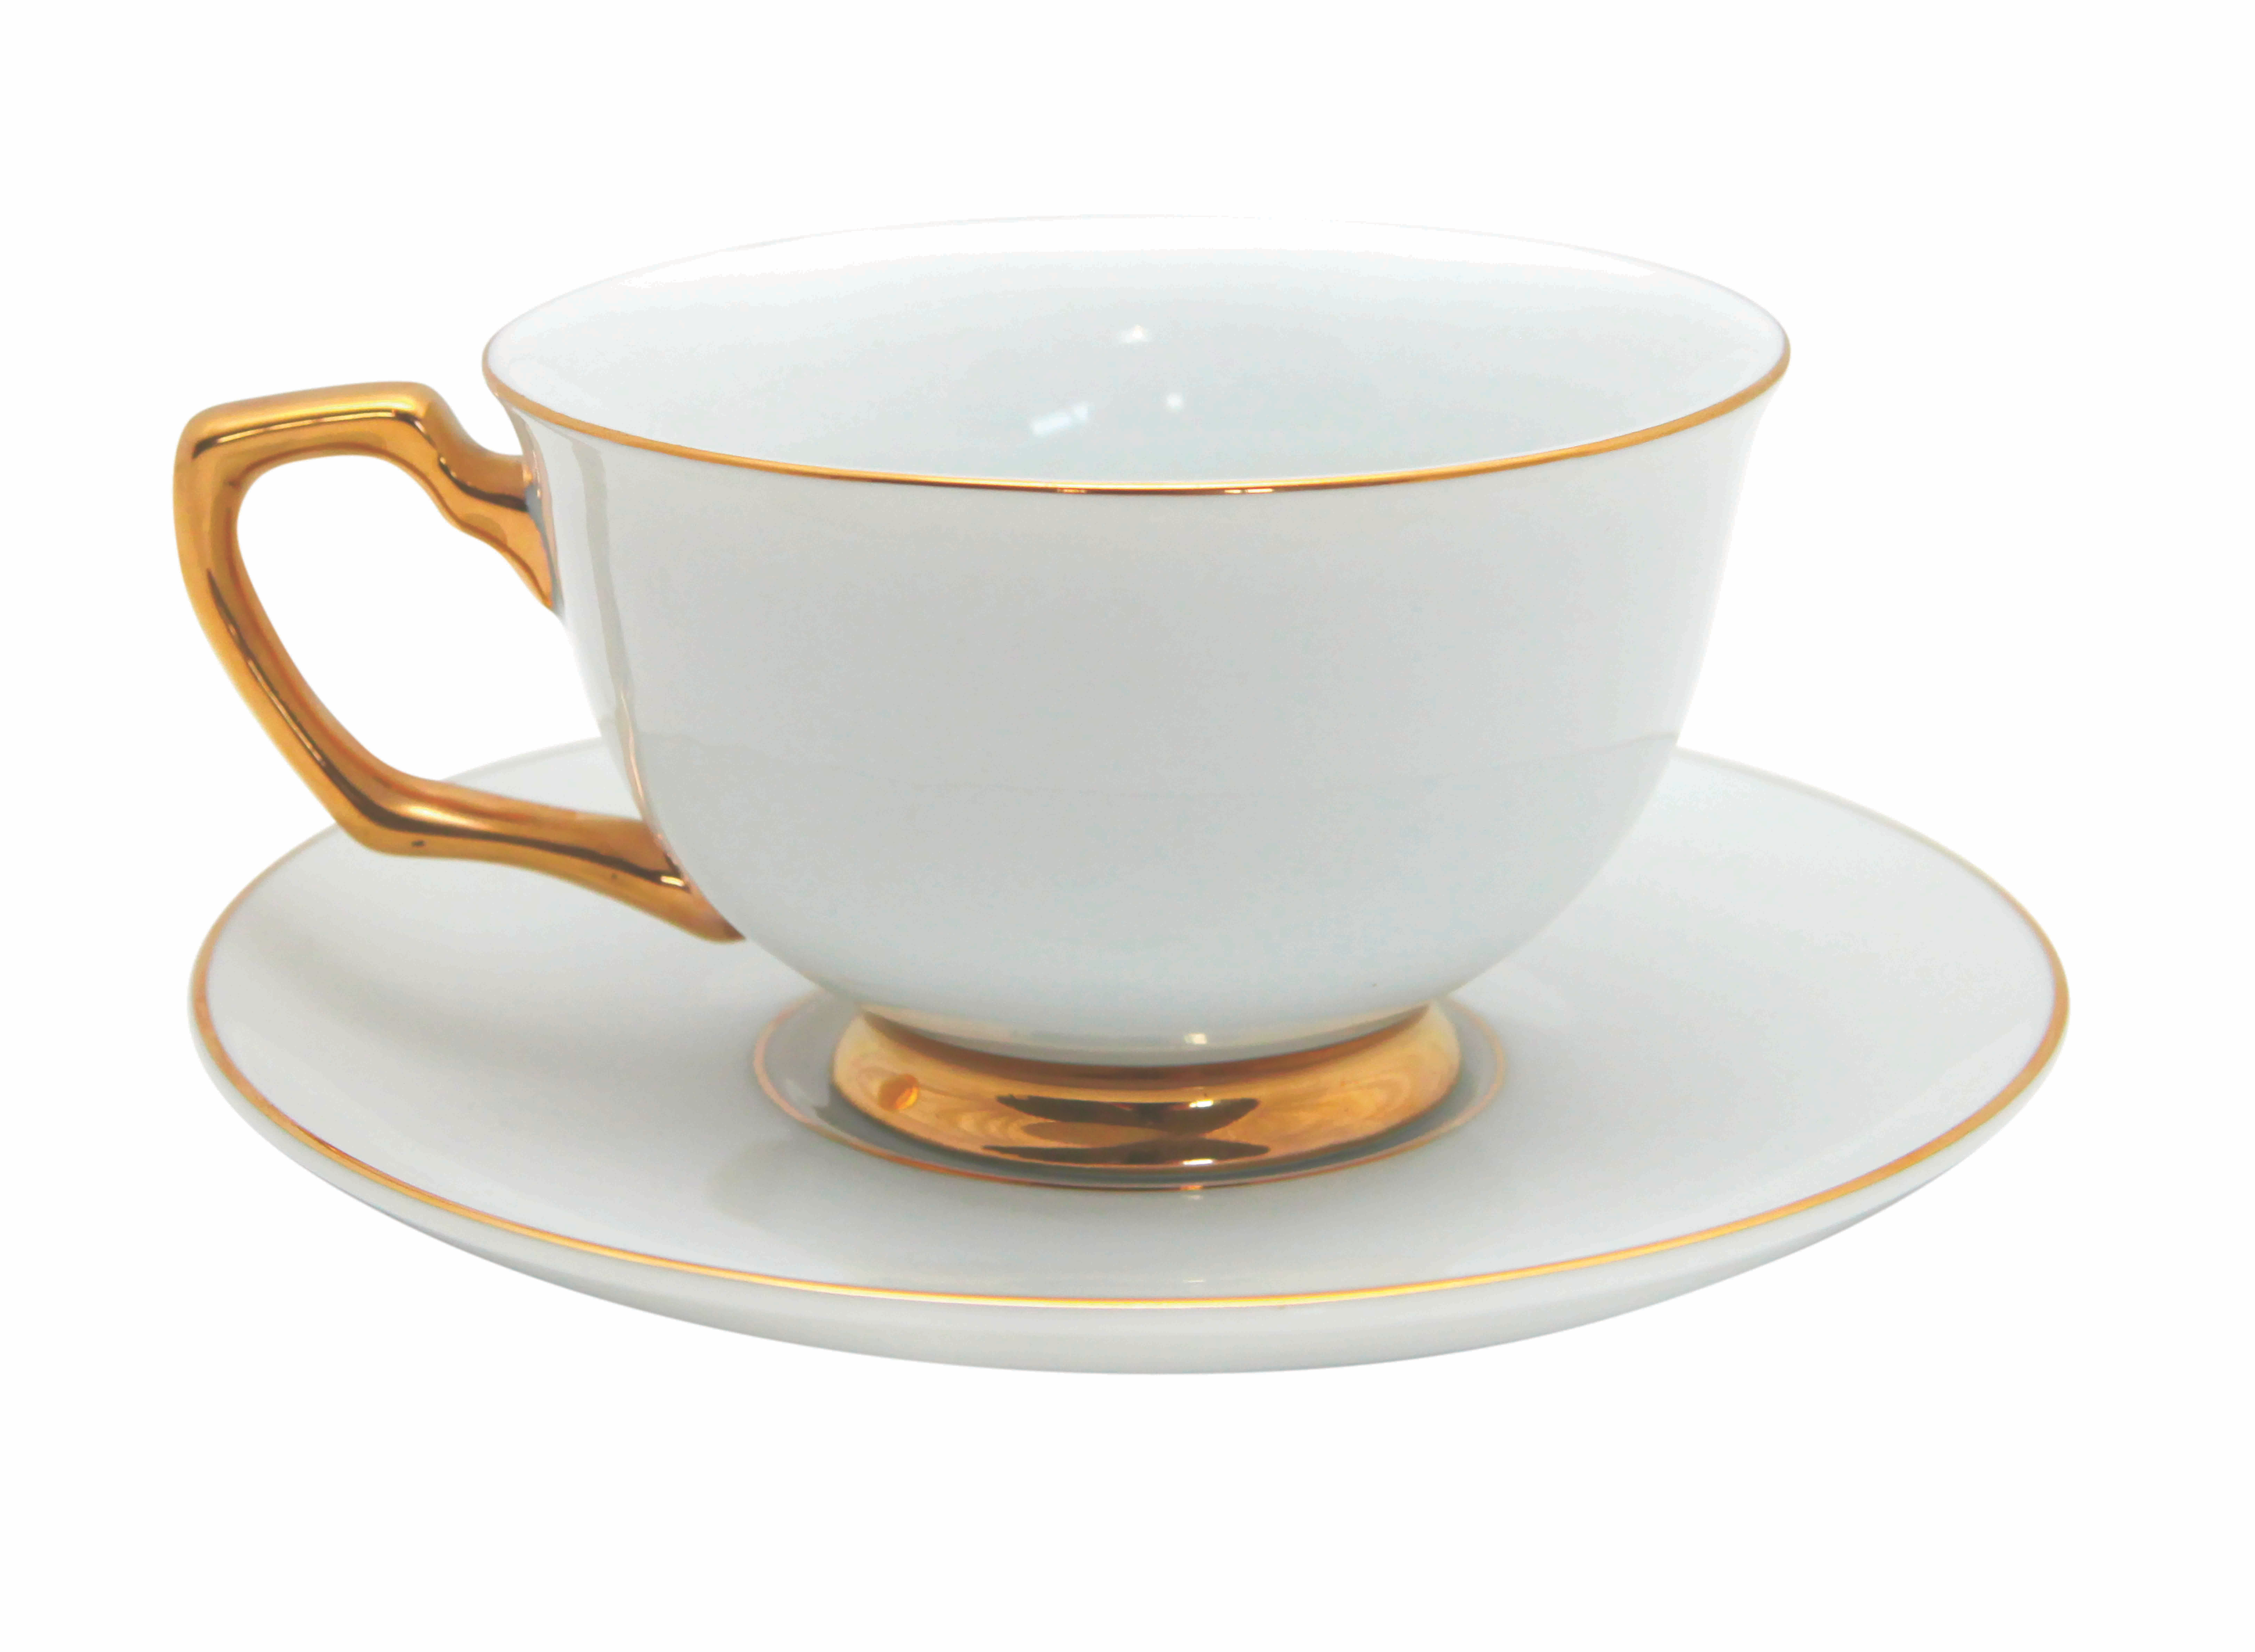 Png Tea Cup And Saucer Hdpng Pluspng.com 3890   Png Tea Cup And - Cup Of Tea, Transparent background PNG HD thumbnail